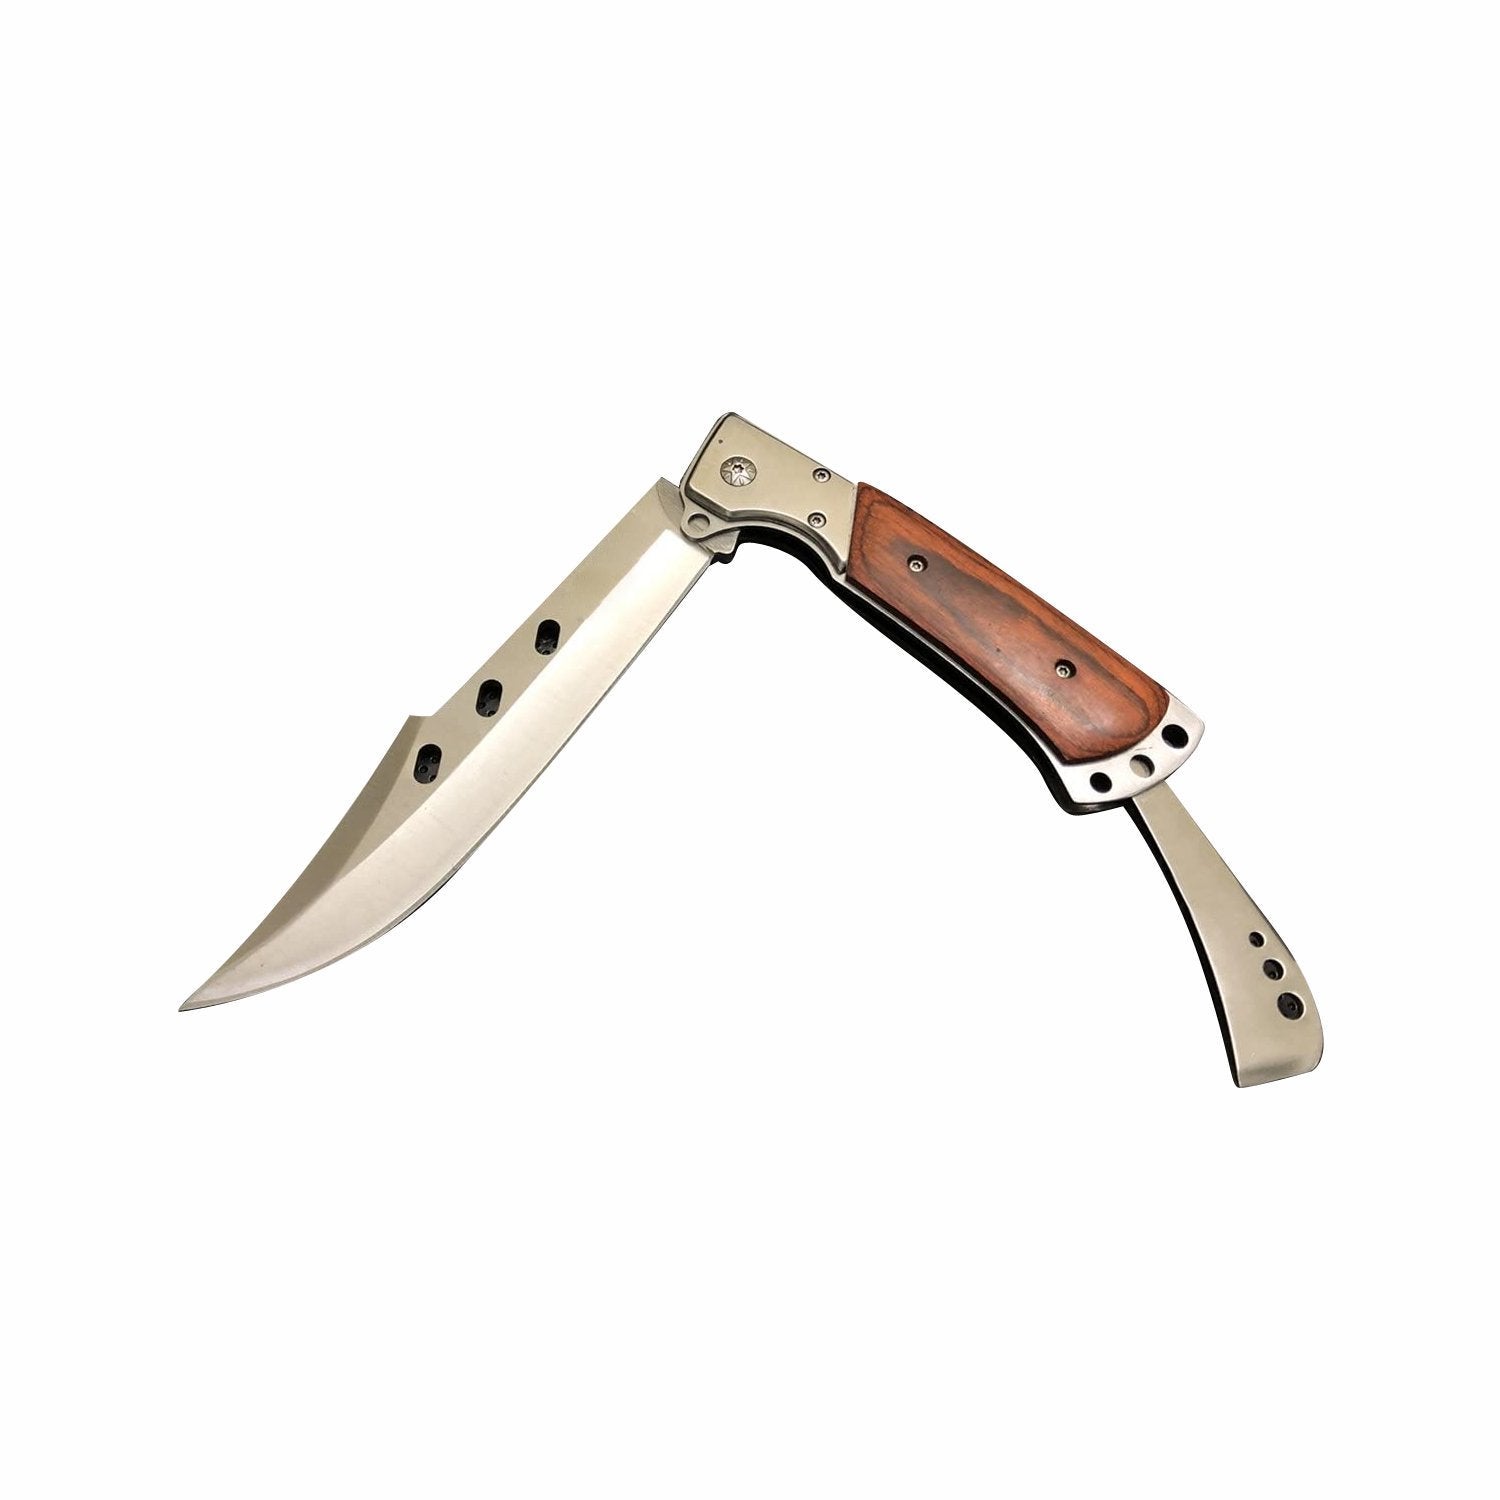 Stainless Steel Camping Knife